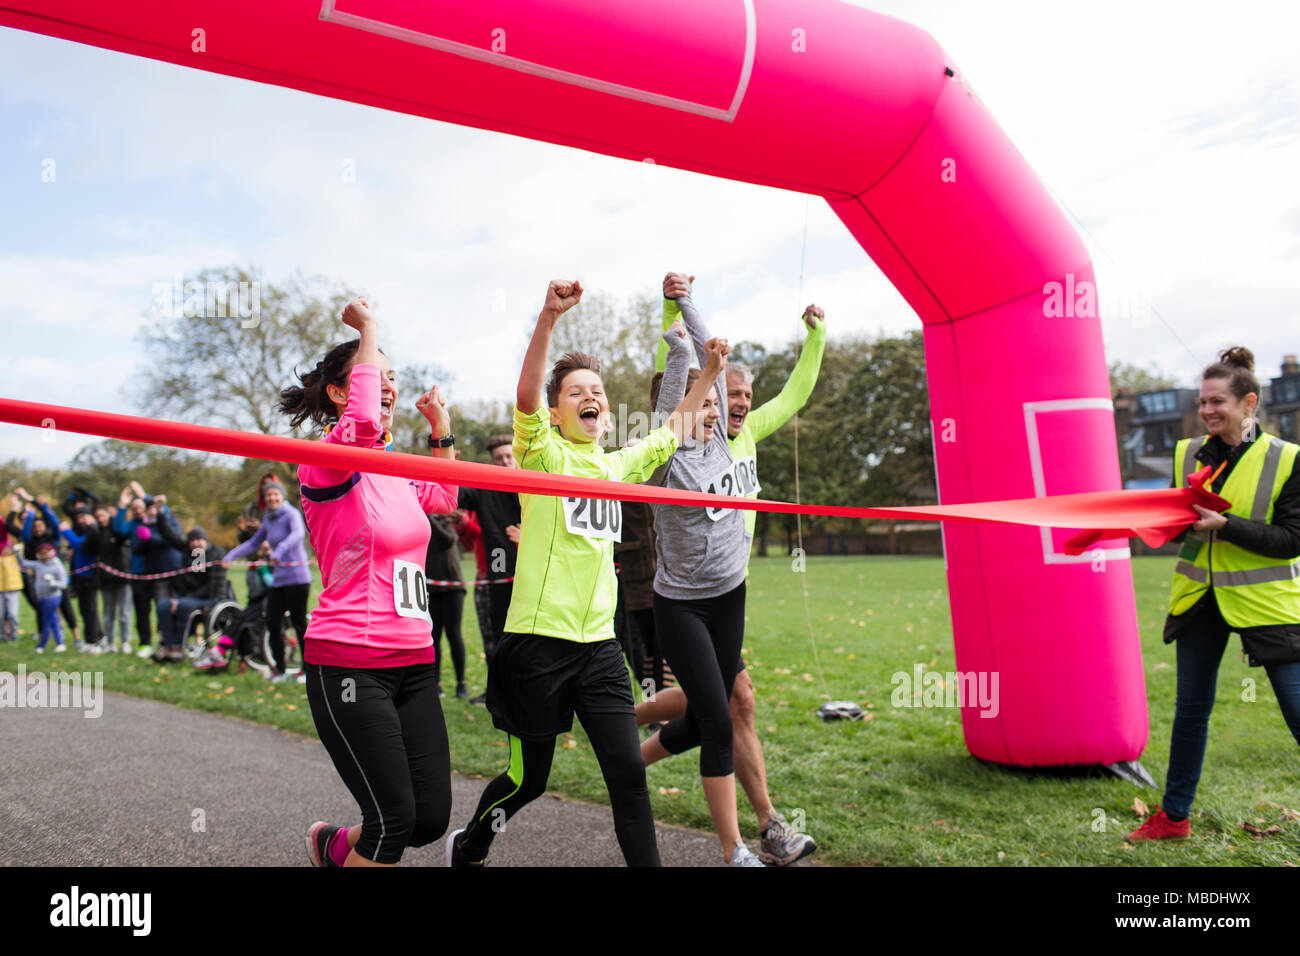 Enthusiastic family runners crossing charity run finish line in park Stock Photo